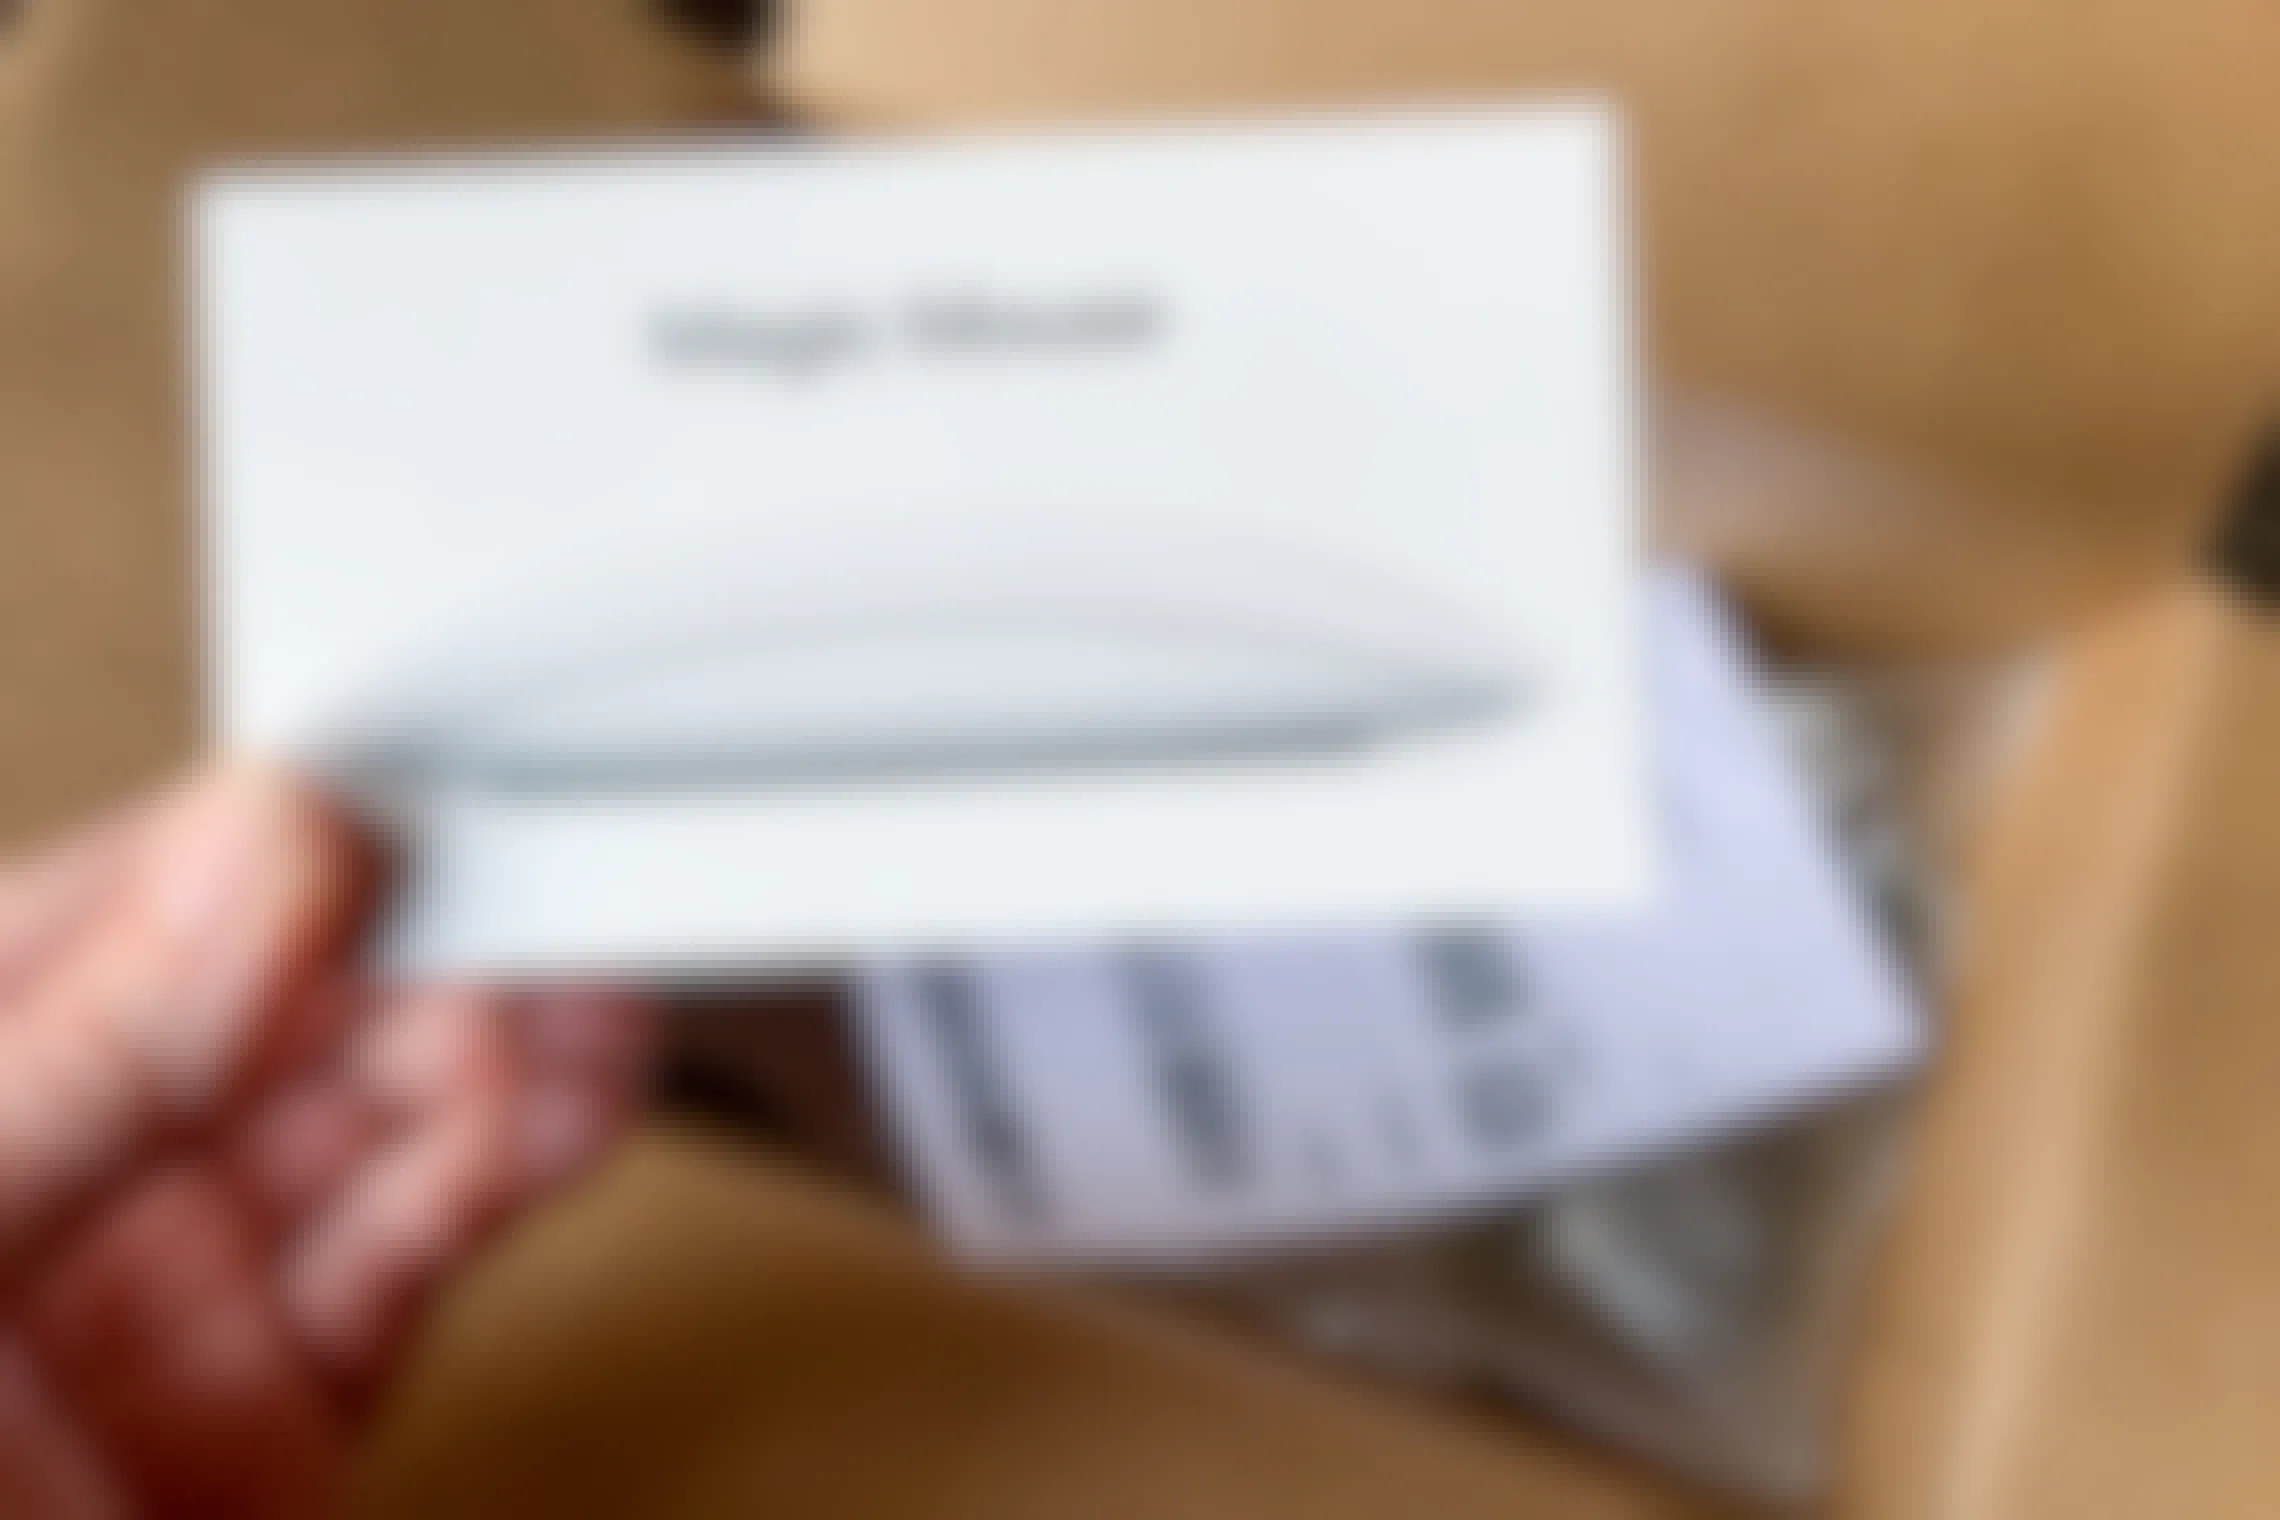 Apple magic mouse and return label next to a shipping box.